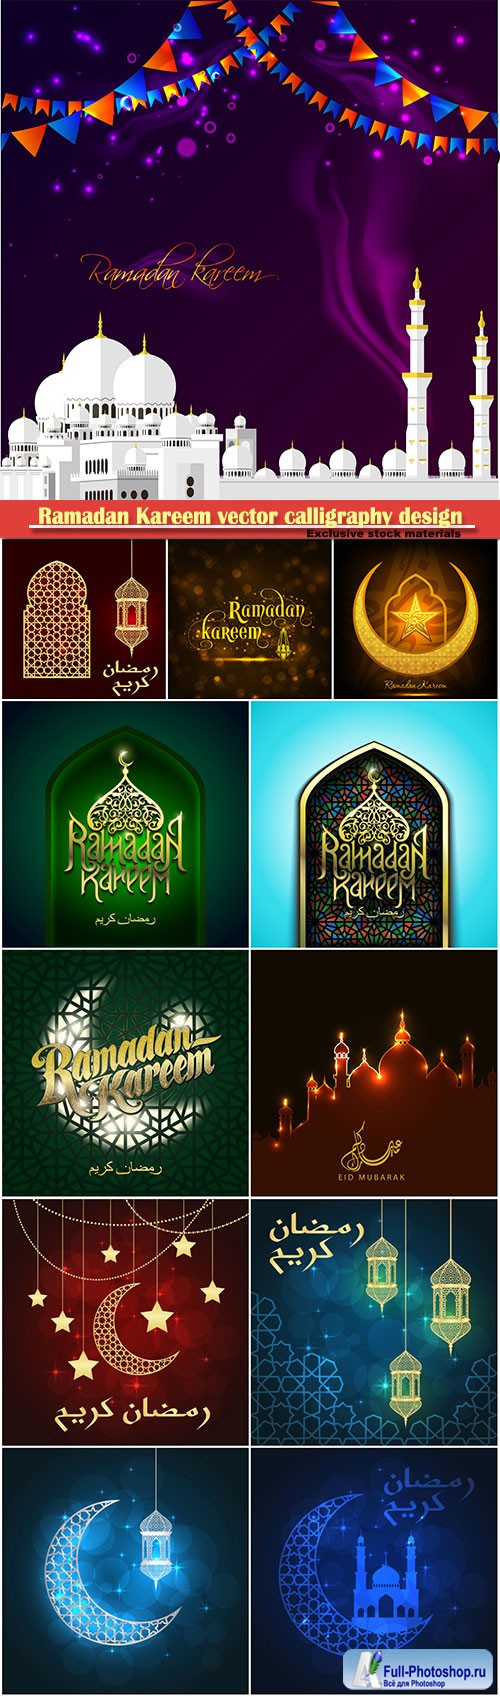 Ramadan Kareem vector calligraphy design with decorative floral pattern, mosque silhouette, crescent and glittering islamic background # 21